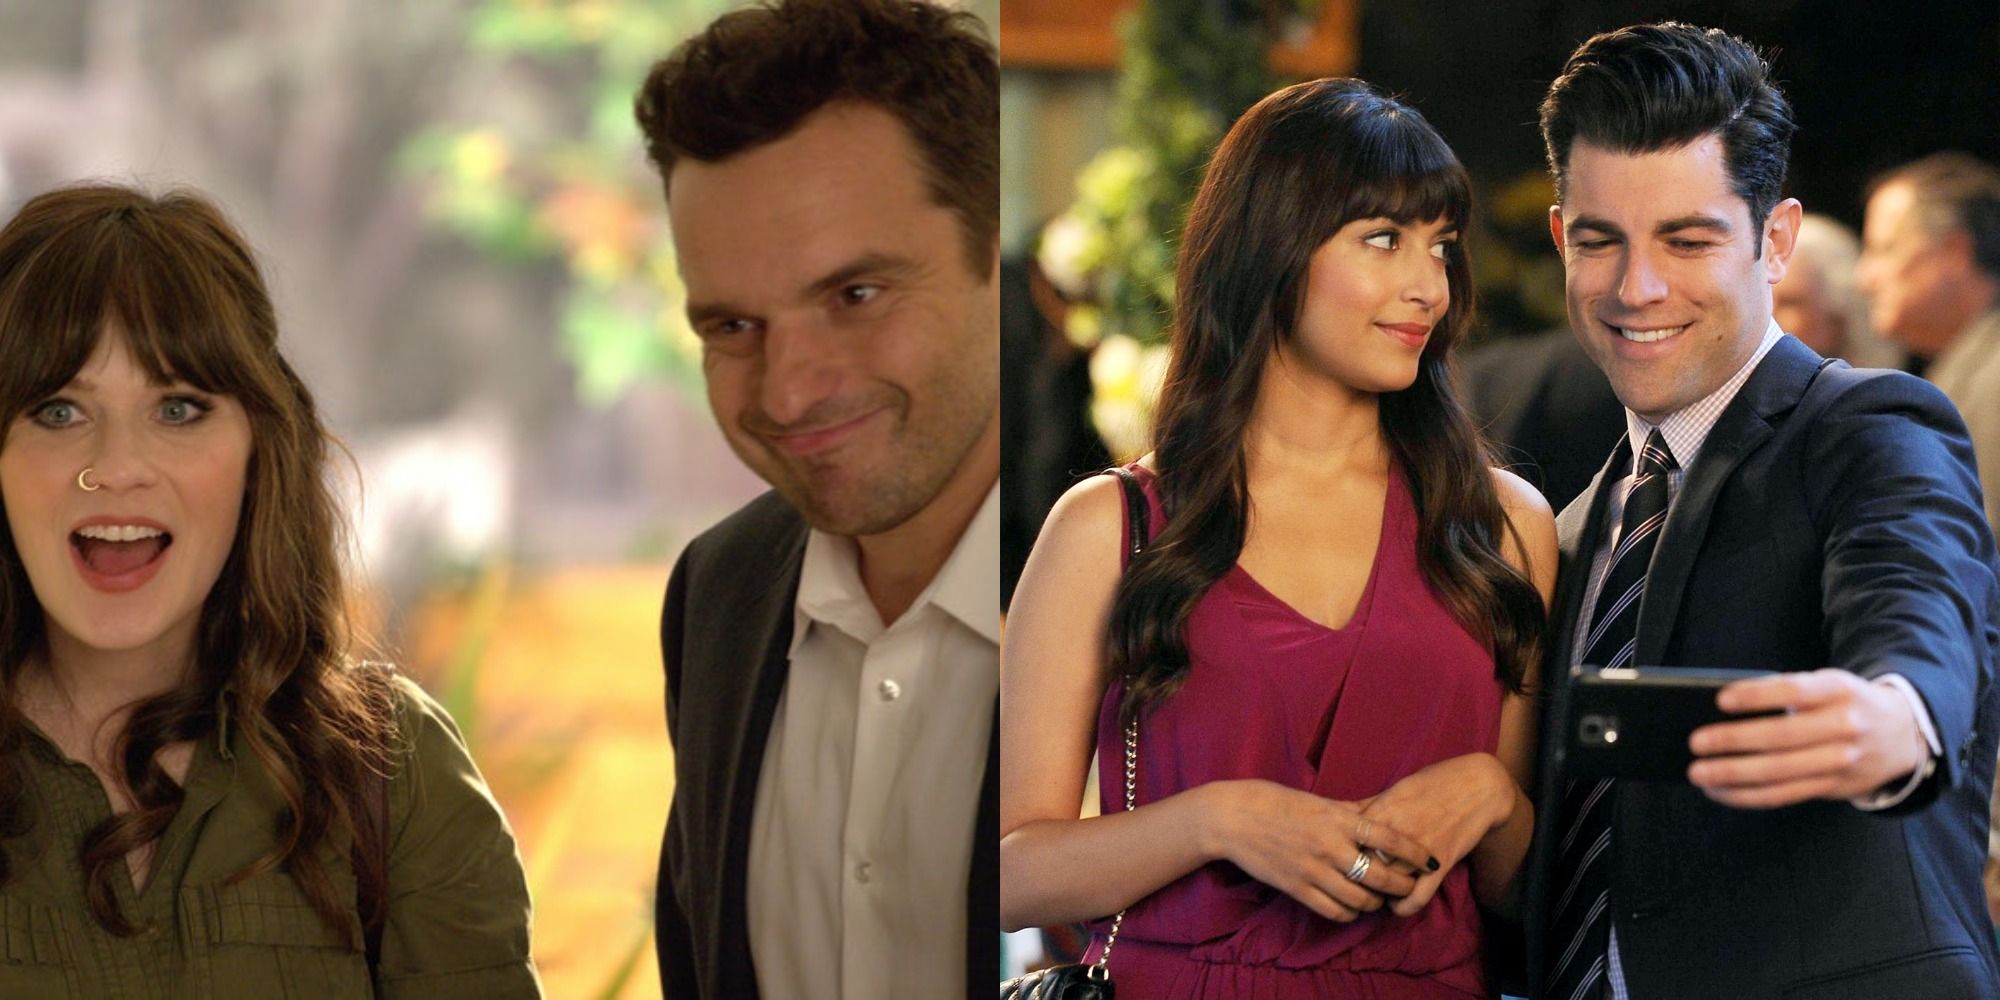 New Girl characters laughing and taking selfies